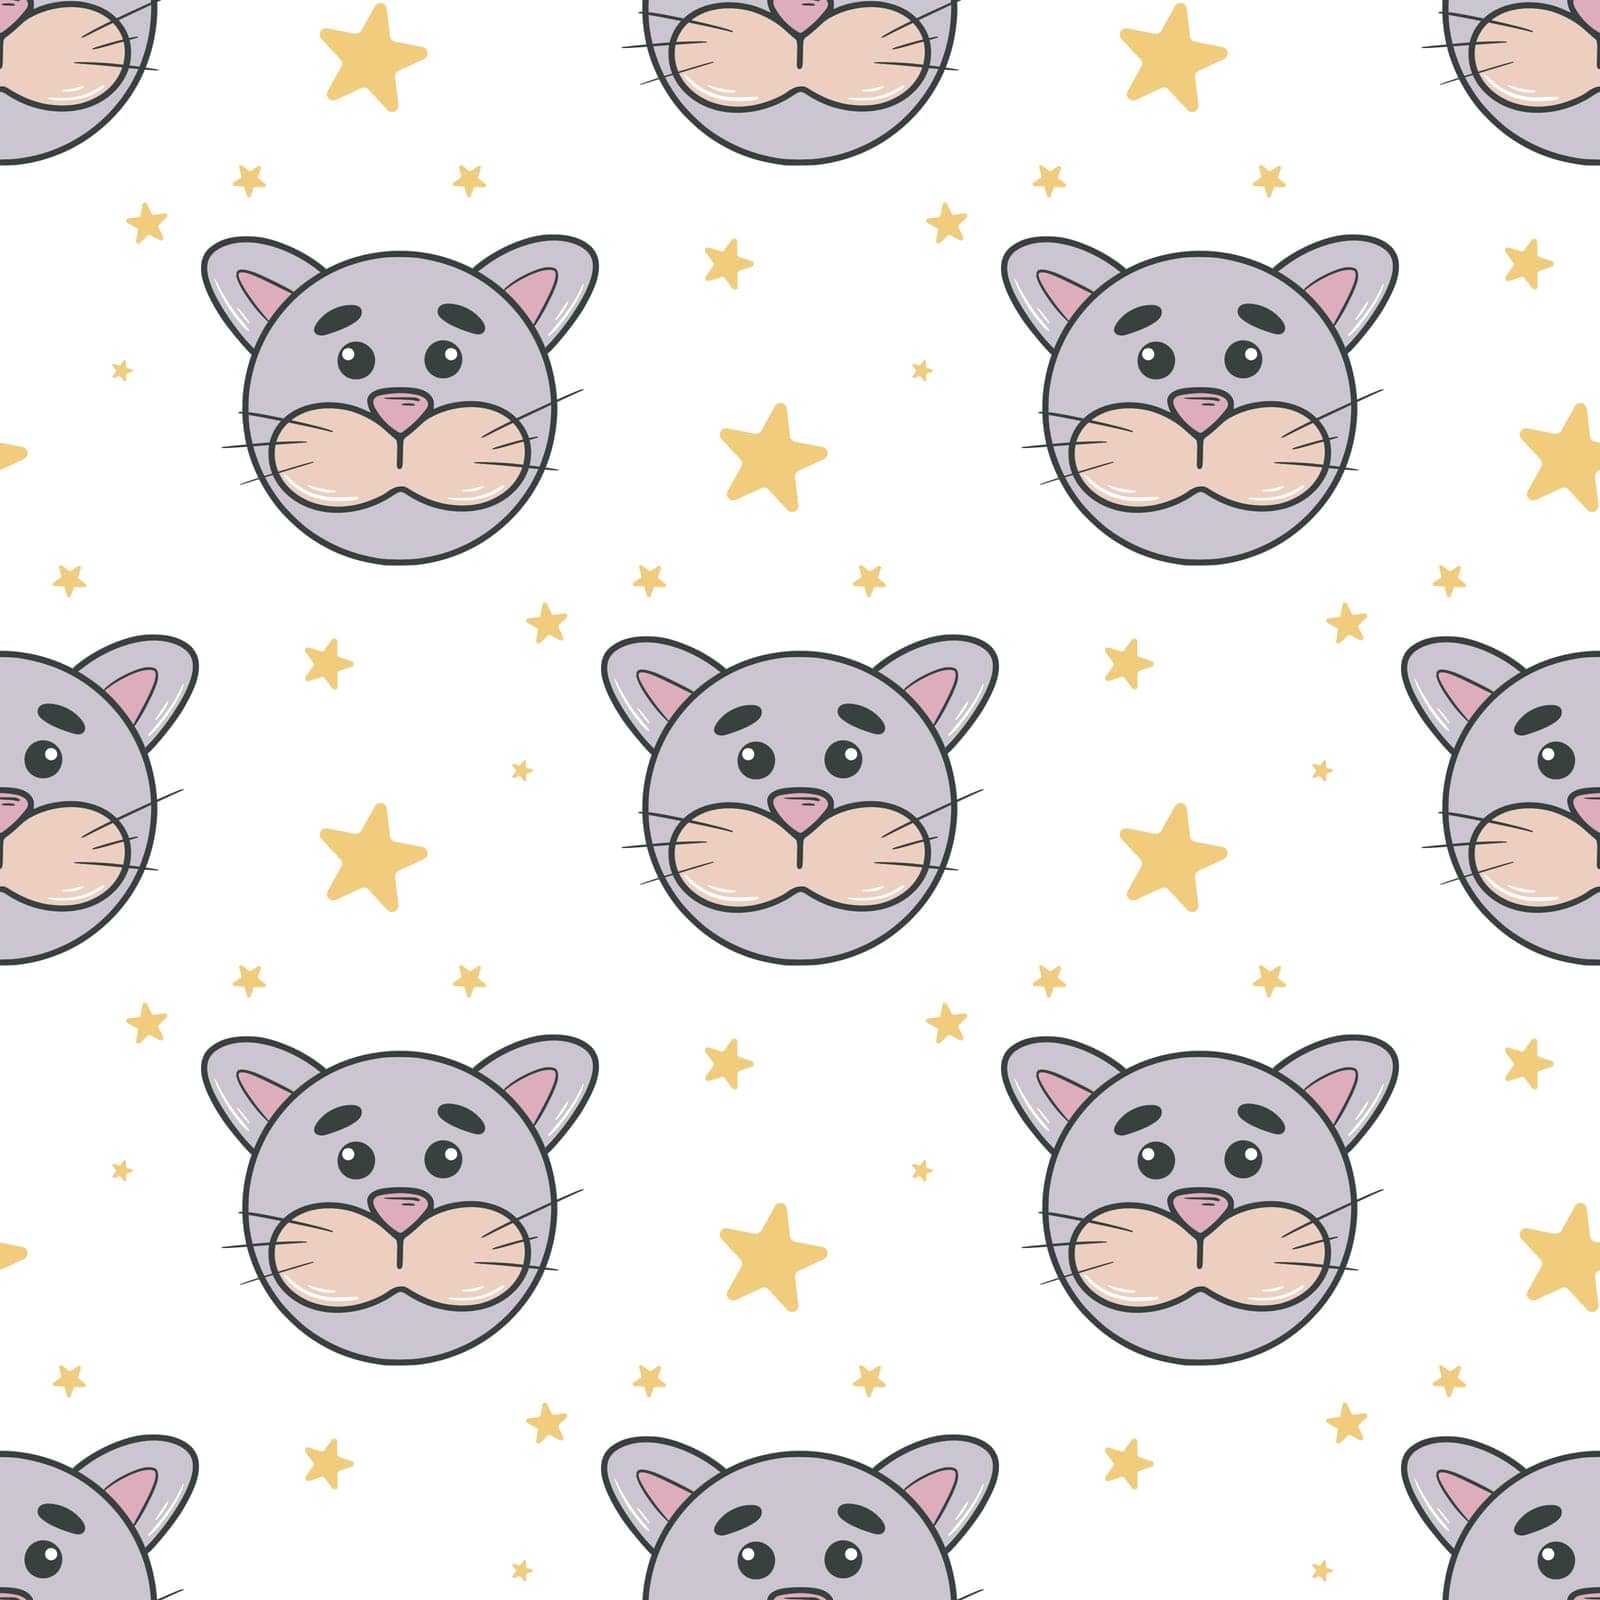 Cats and stars festive background by TassiaK